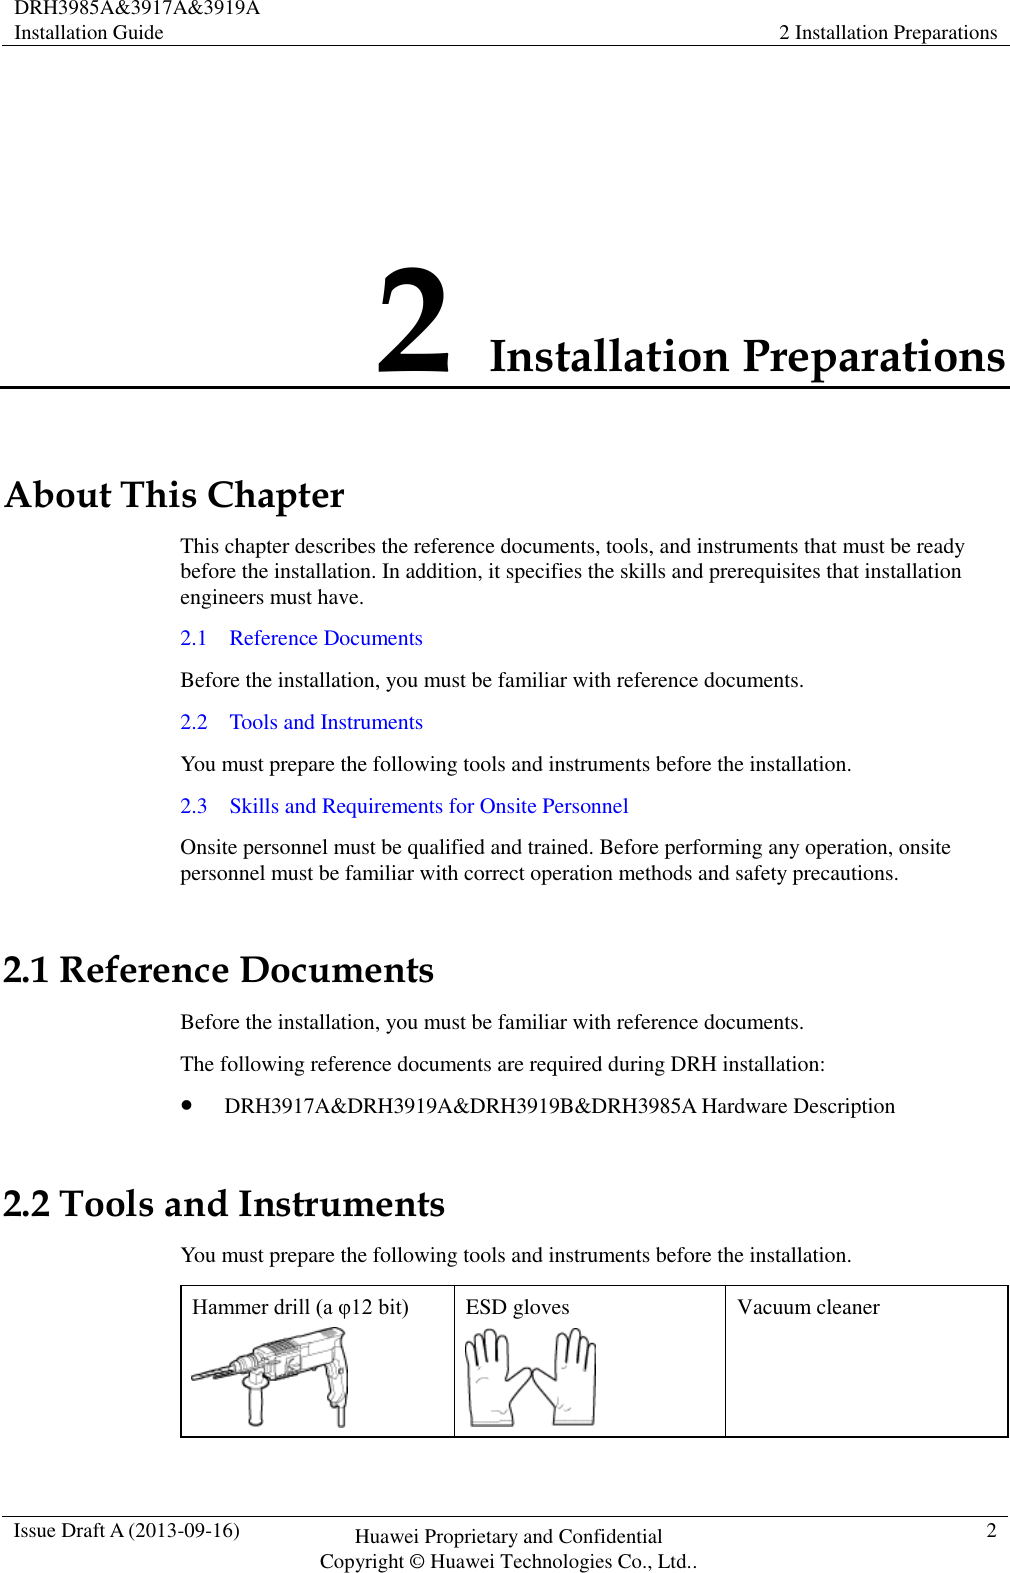 DRH3985A&amp;3917A&amp;3919A Installation Guide 2 Installation Preparations  Issue Draft A (2013-09-16) Huawei Proprietary and Confidential                                     Copyright © Huawei Technologies Co., Ltd.. 2  2 Installation Preparations About This Chapter This chapter describes the reference documents, tools, and instruments that must be ready before the installation. In addition, it specifies the skills and prerequisites that installation engineers must have. 2.1    Reference Documents Before the installation, you must be familiar with reference documents. 2.2    Tools and Instruments You must prepare the following tools and instruments before the installation. 2.3    Skills and Requirements for Onsite Personnel Onsite personnel must be qualified and trained. Before performing any operation, onsite personnel must be familiar with correct operation methods and safety precautions. 2.1 Reference Documents Before the installation, you must be familiar with reference documents. The following reference documents are required during DRH installation:  DRH3917A&amp;DRH3919A&amp;DRH3919B&amp;DRH3985A Hardware Description 2.2 Tools and Instruments You must prepare the following tools and instruments before the installation. Hammer drill (a φ12 bit)  ESD gloves  Vacuum cleaner 